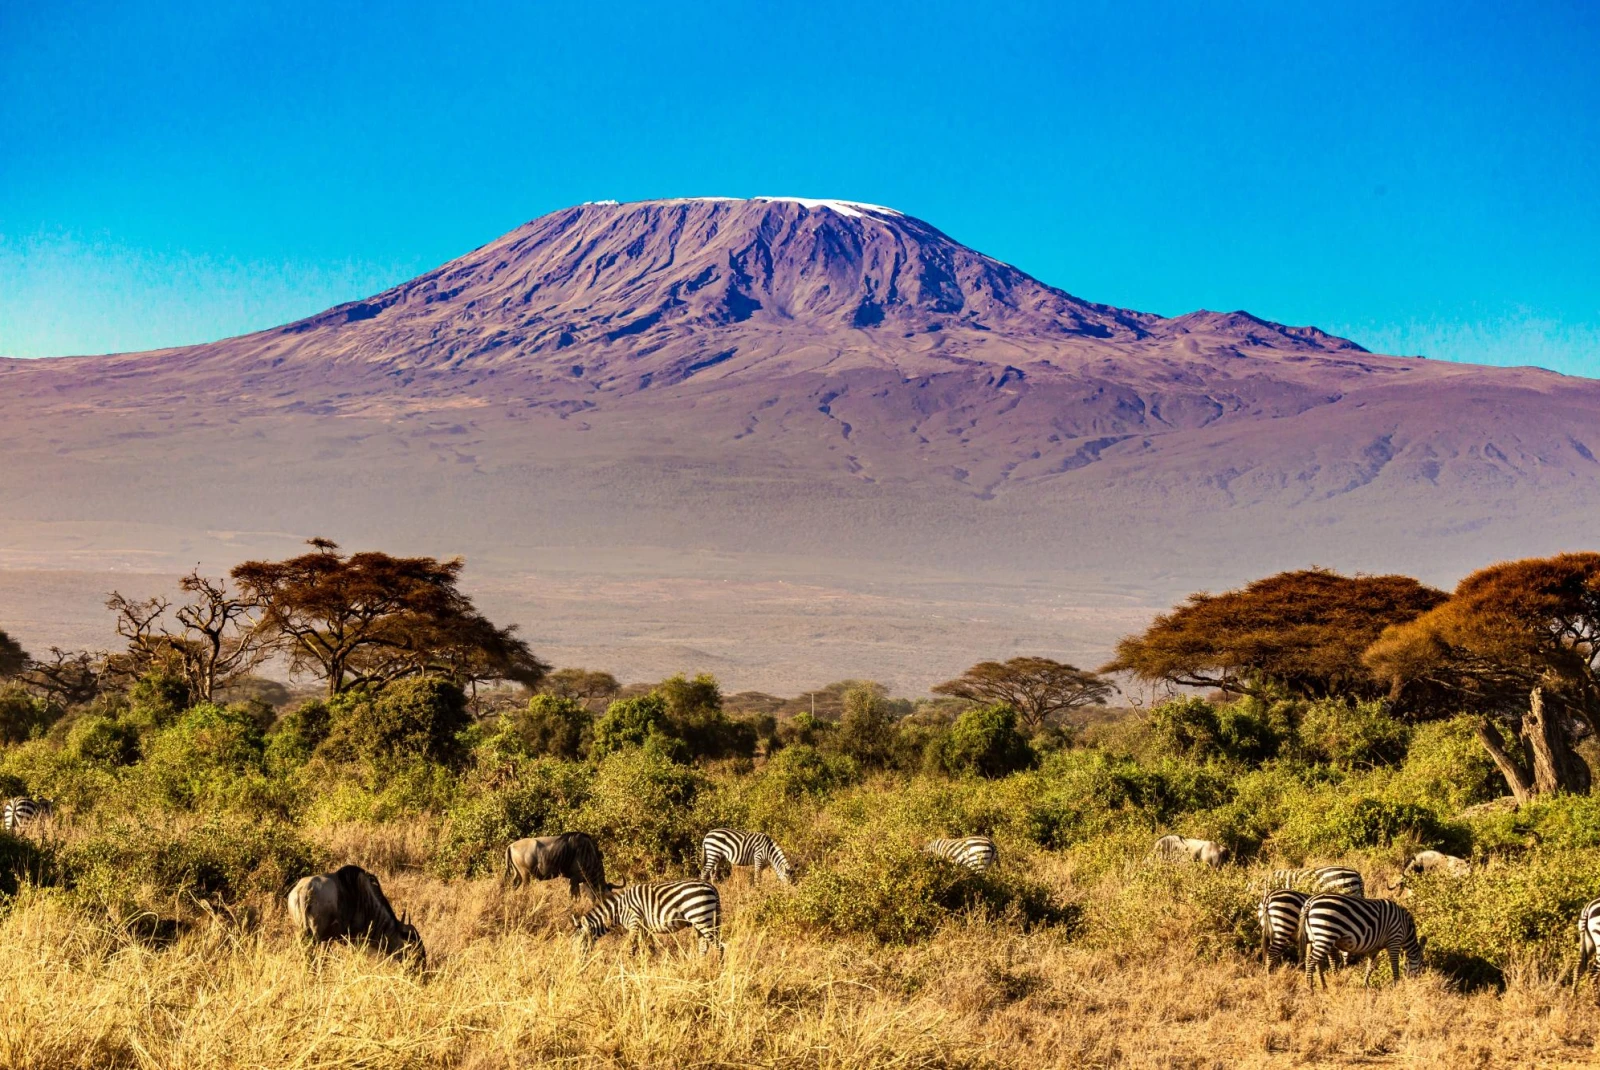 Mount Kilimanjaro on a clear day with zebras grazing in front. 